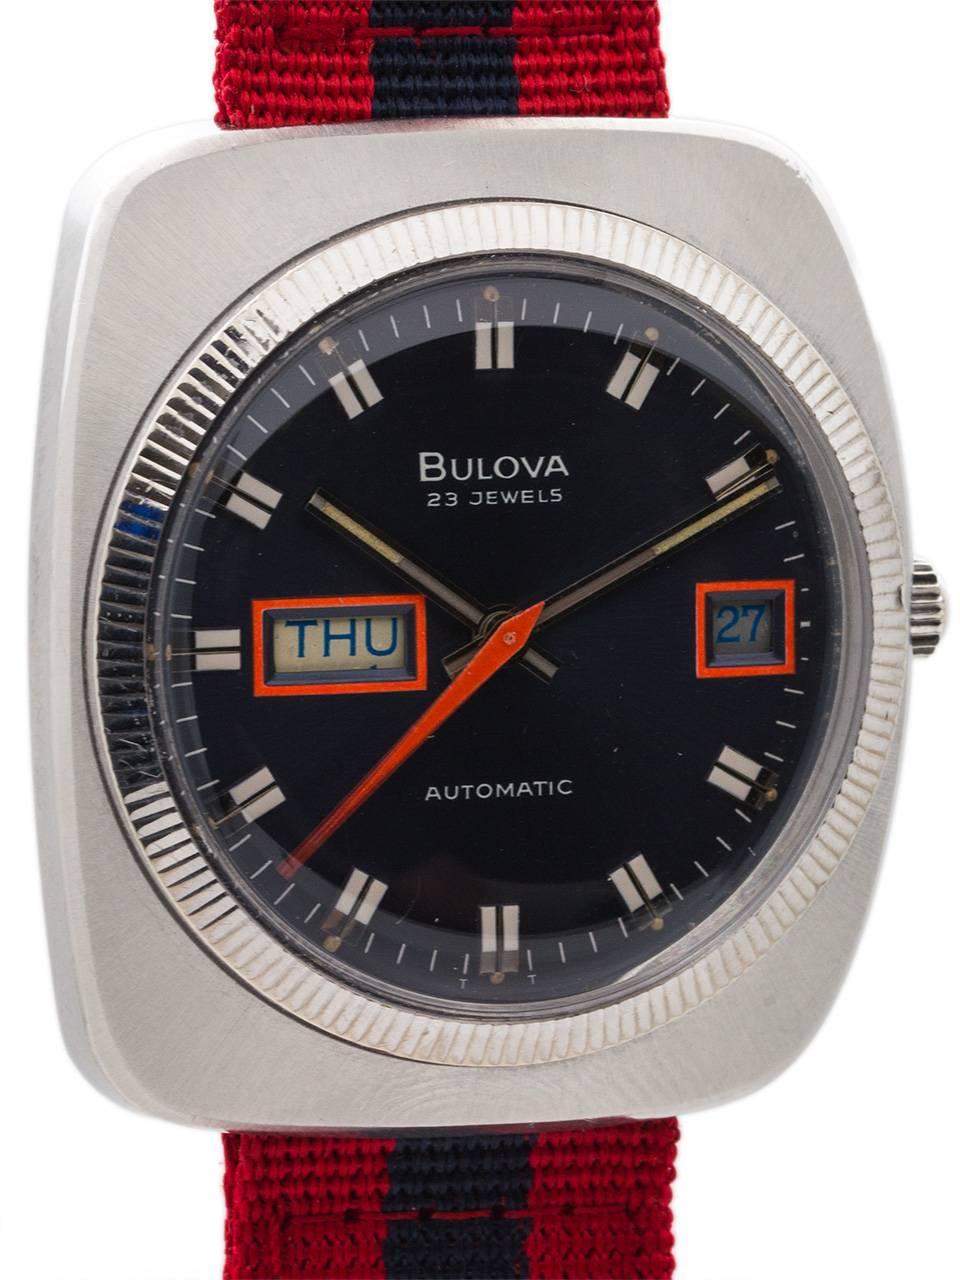 
Colorful and sporty style Bulova man’s cushion shaped case dress model circa 1973. Featuring 35 x 39mm cushion shaped case with brushed finish bezel, fluted white gold filled bezel, acrylic crystal, and very pleasing blue original dial with applied